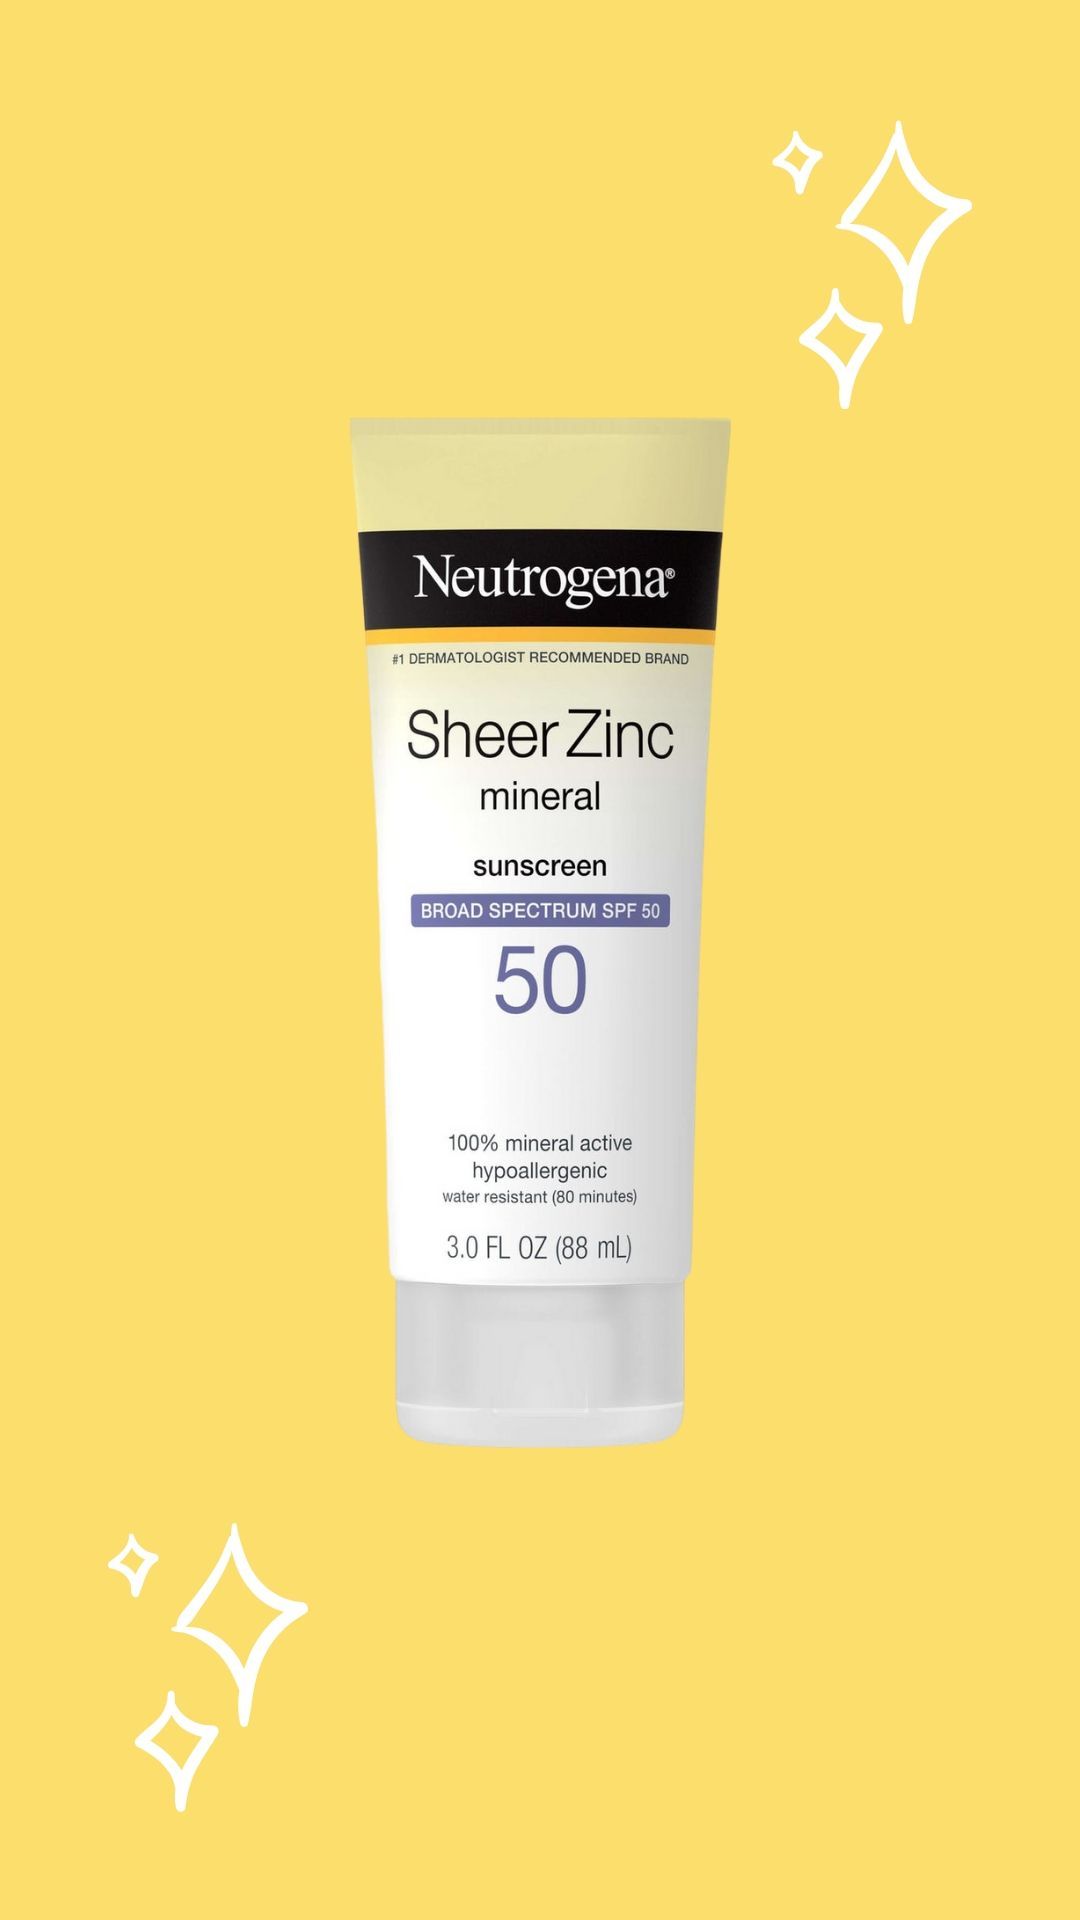 Neutrogena Sheer Zinc Mineral Sunscreen, yellow background with sparkles